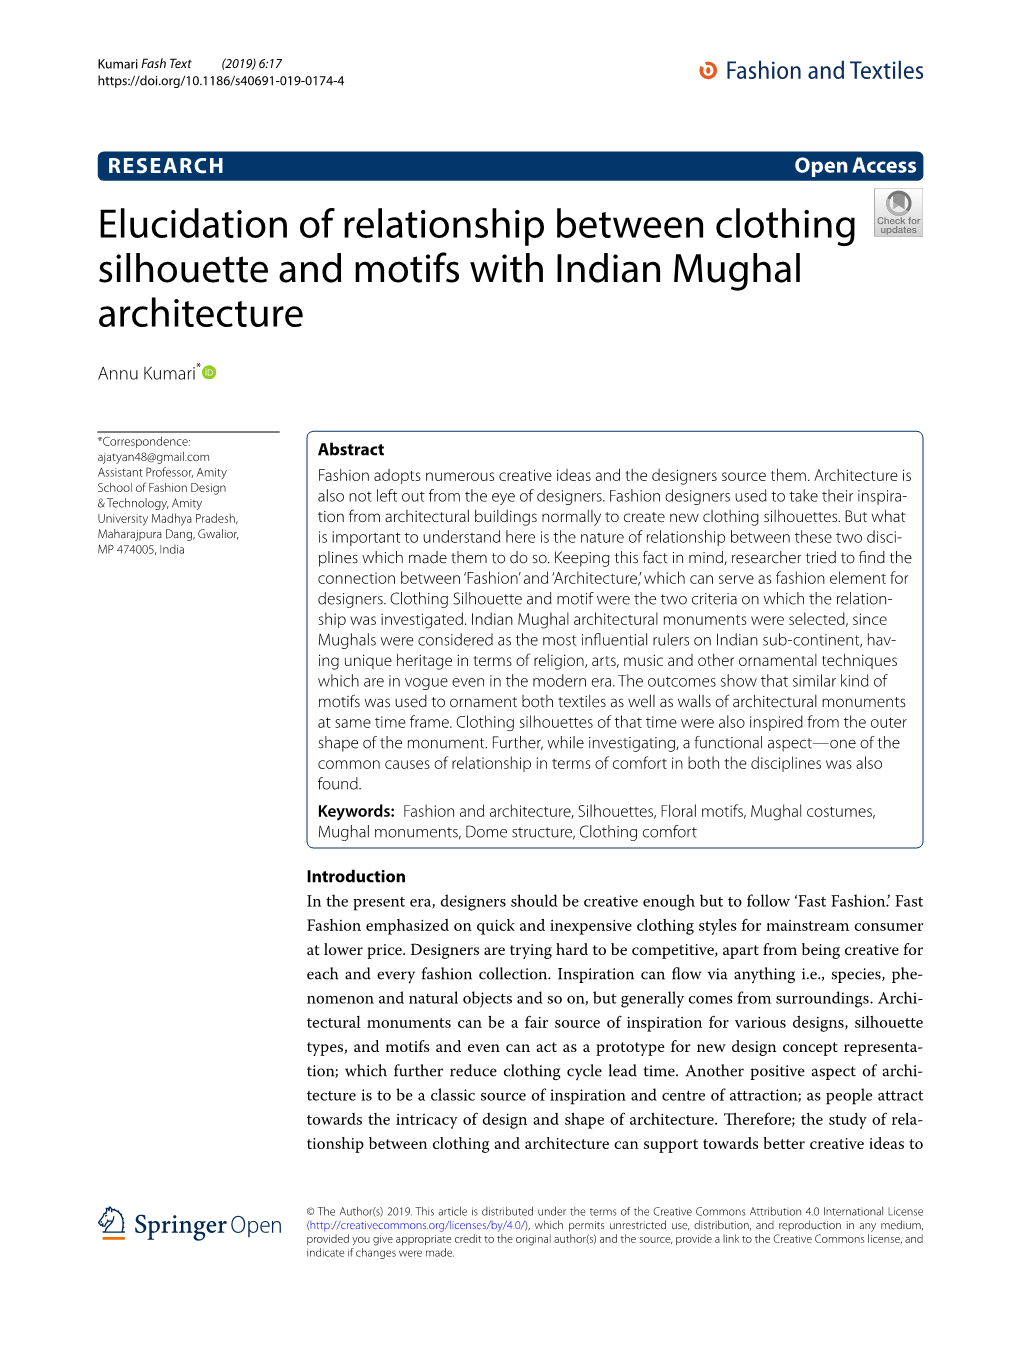 Elucidation of Relationship Between Clothing Silhouette and Motifs with Indian Mughal Architecture